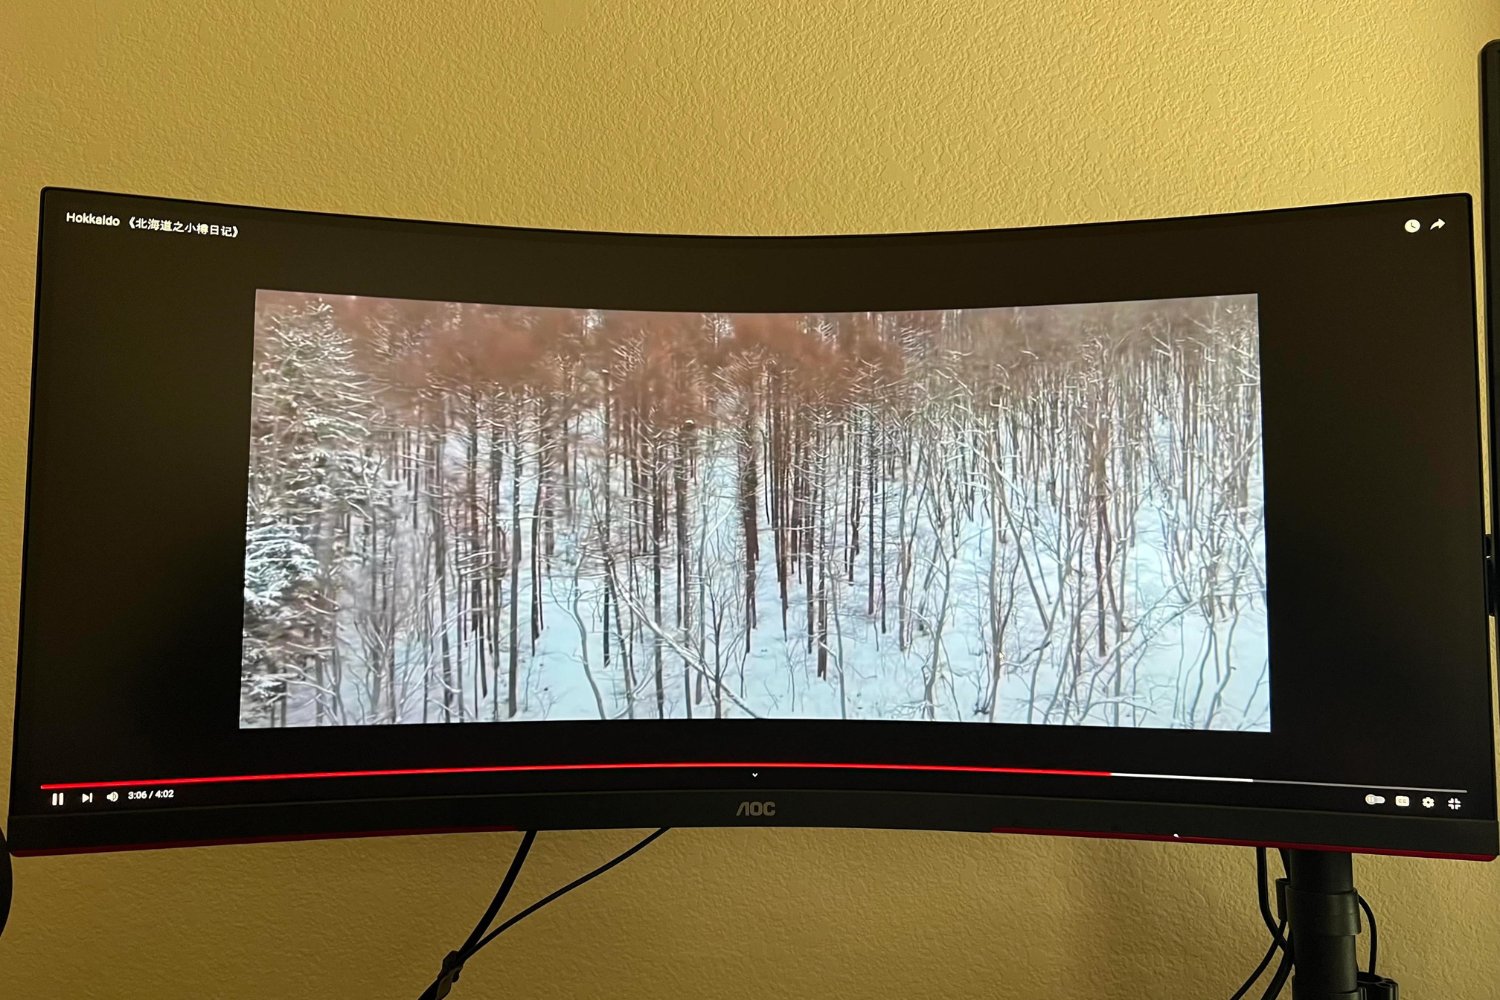 How To Get YouTube Videos To Play On An Ultrawide Monitor